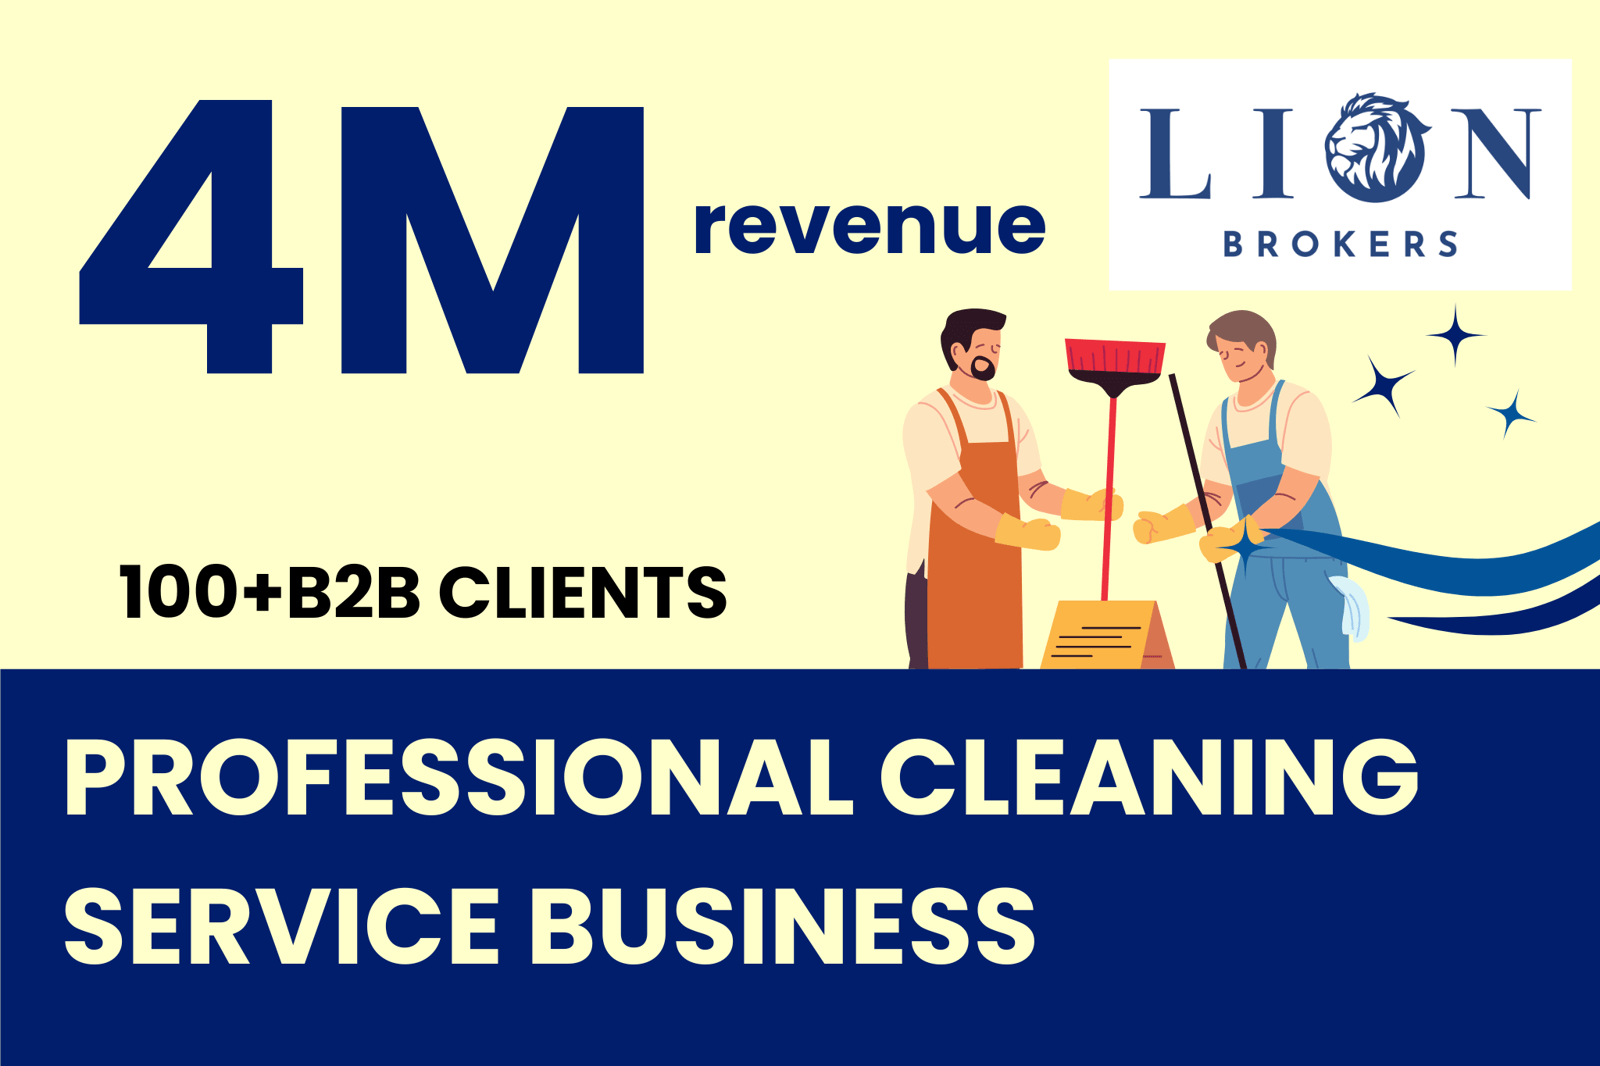 4M Fy2022 Revenue, Well Known Cleaning Company